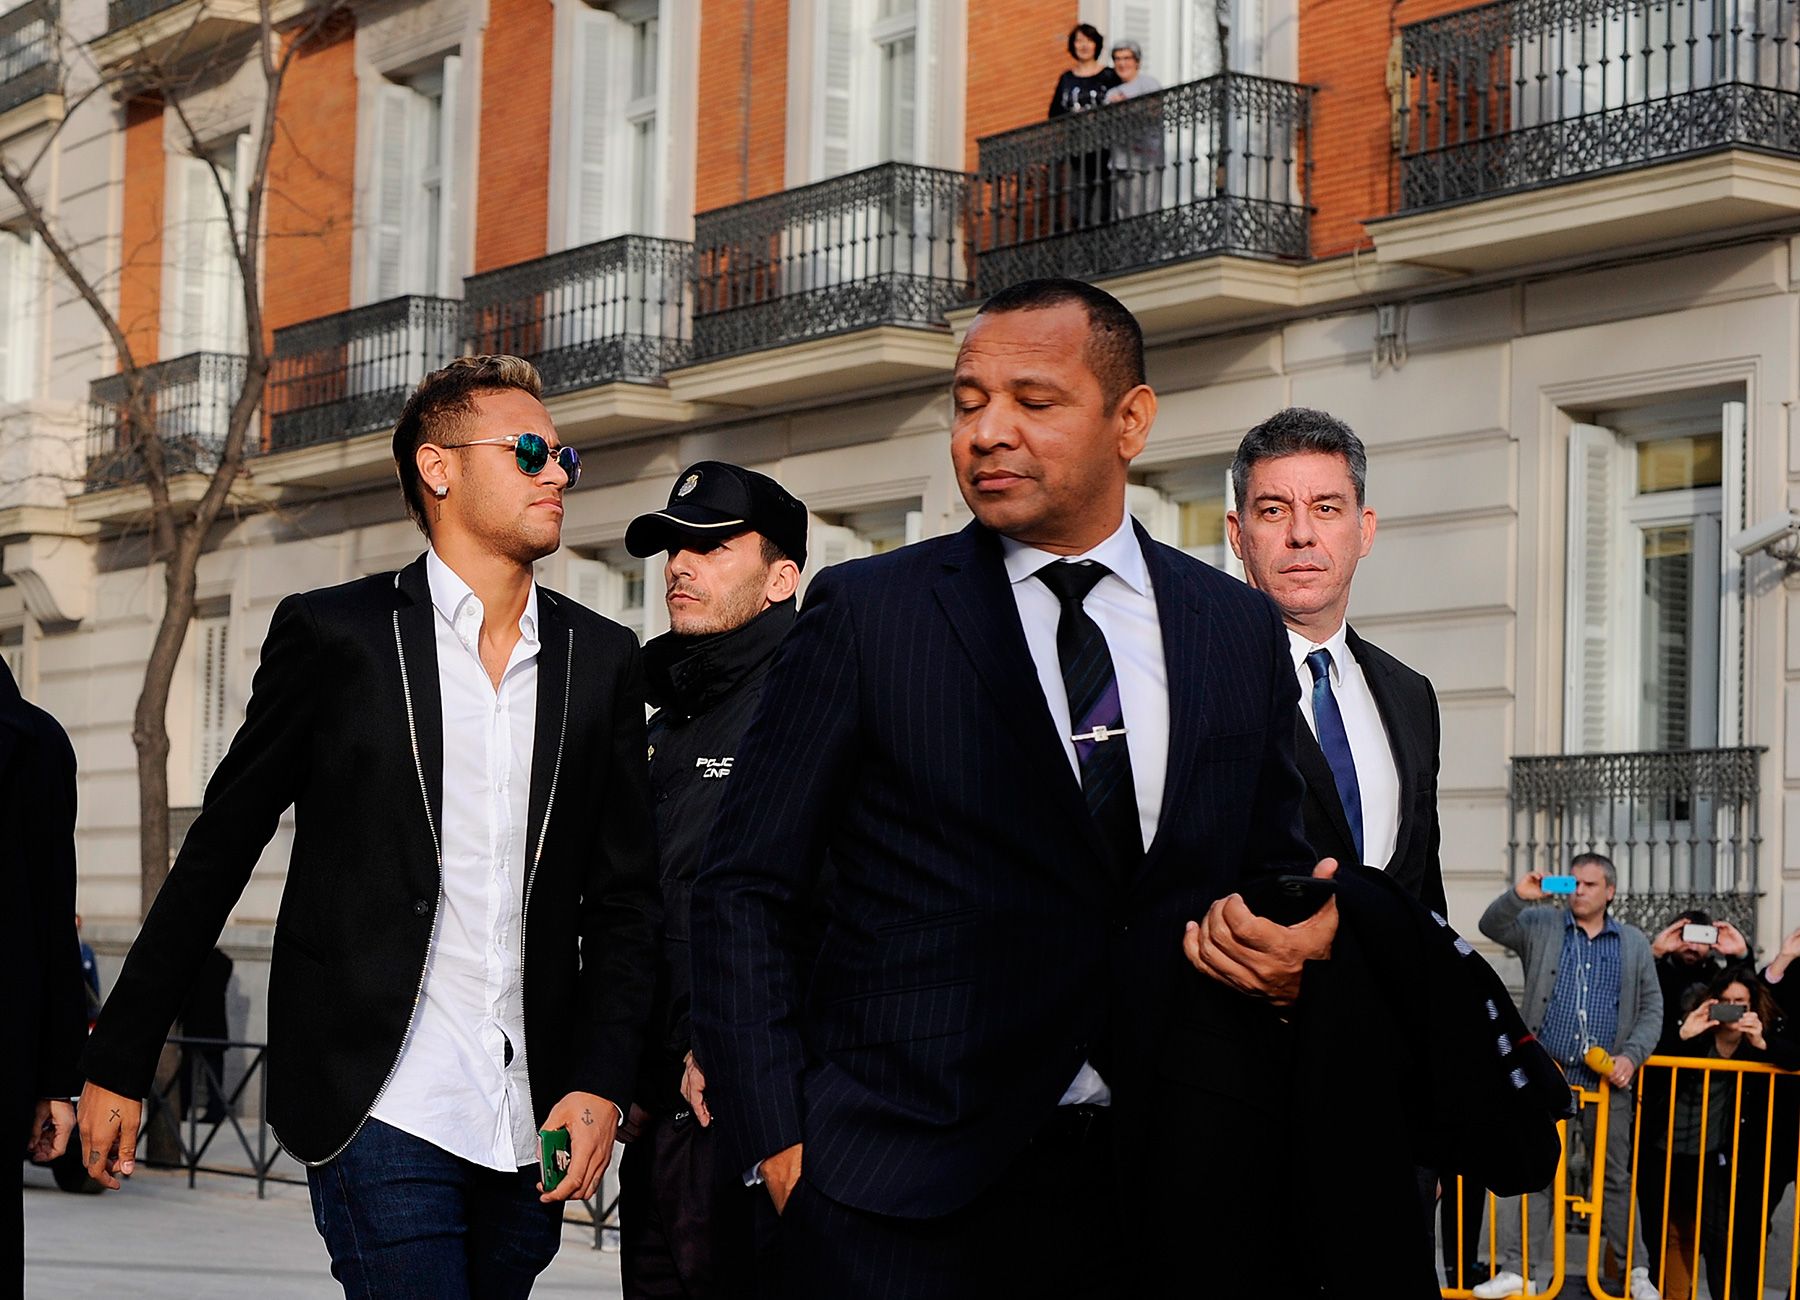 Neymar and his father in the street